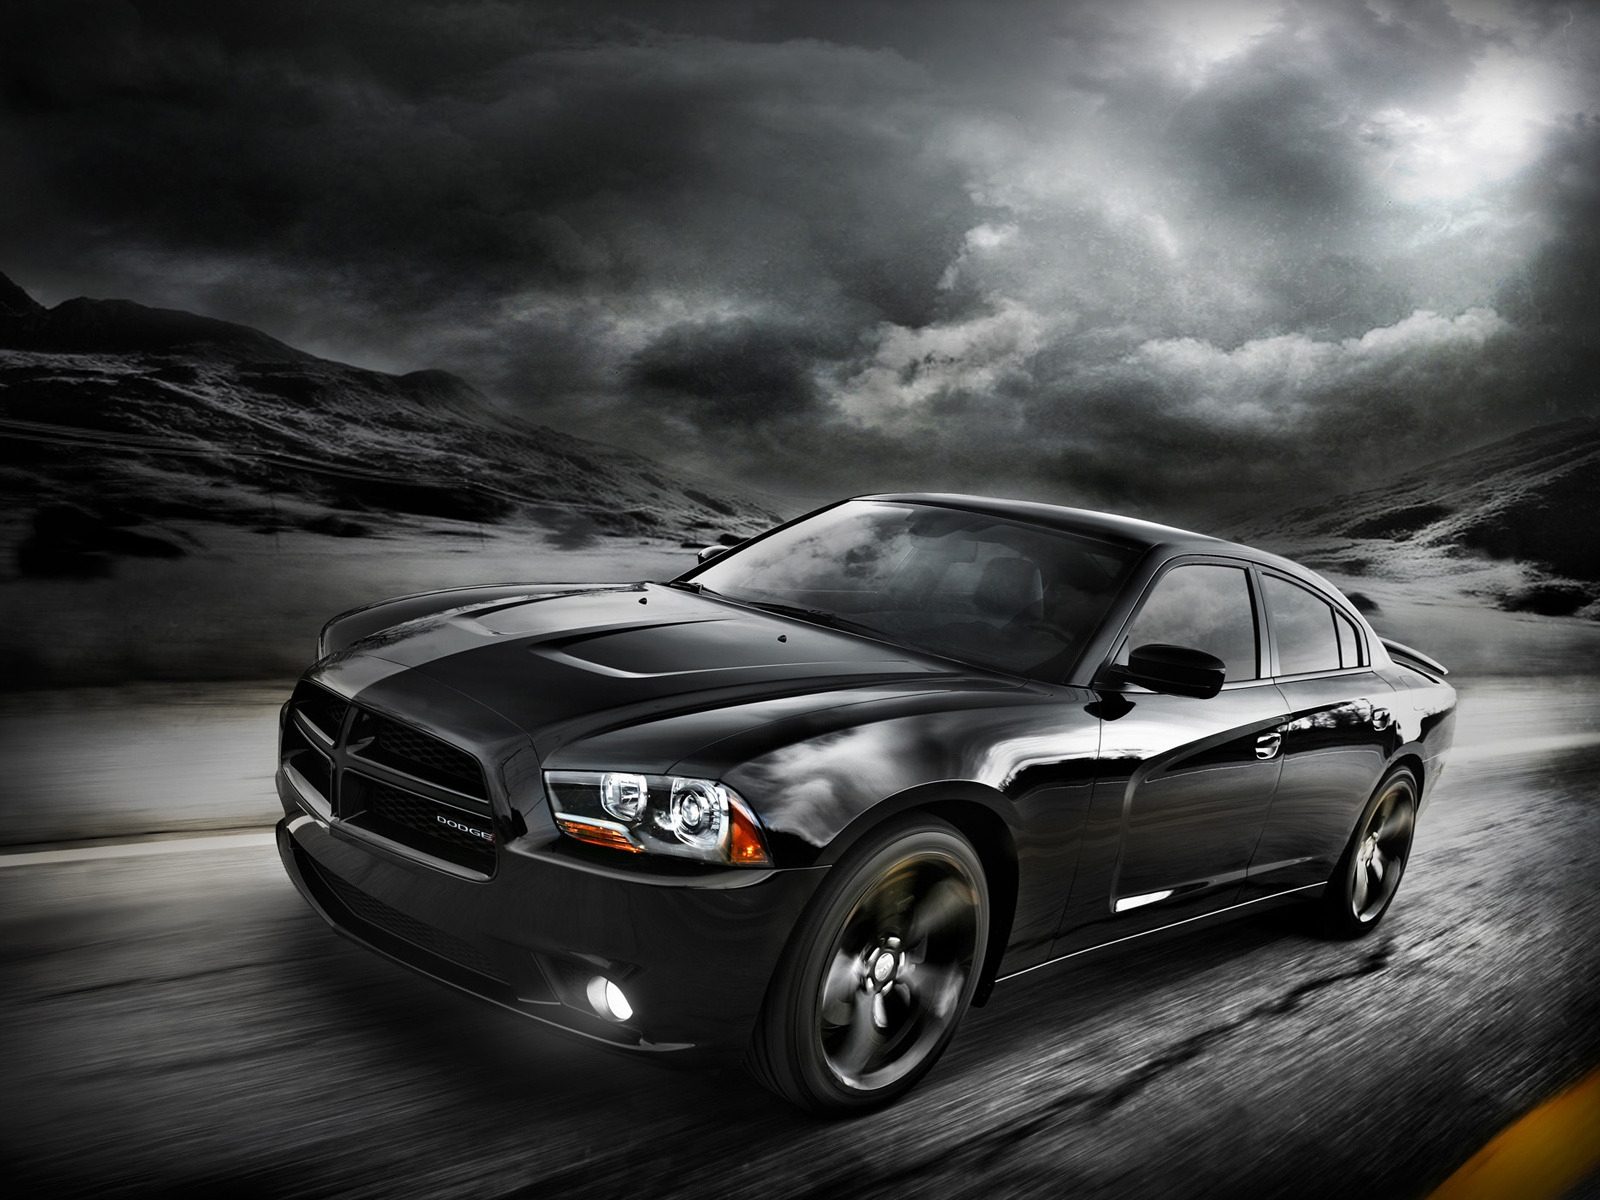 Dodge Charger Blacktop 2012 for 1600 x 1200 resolution